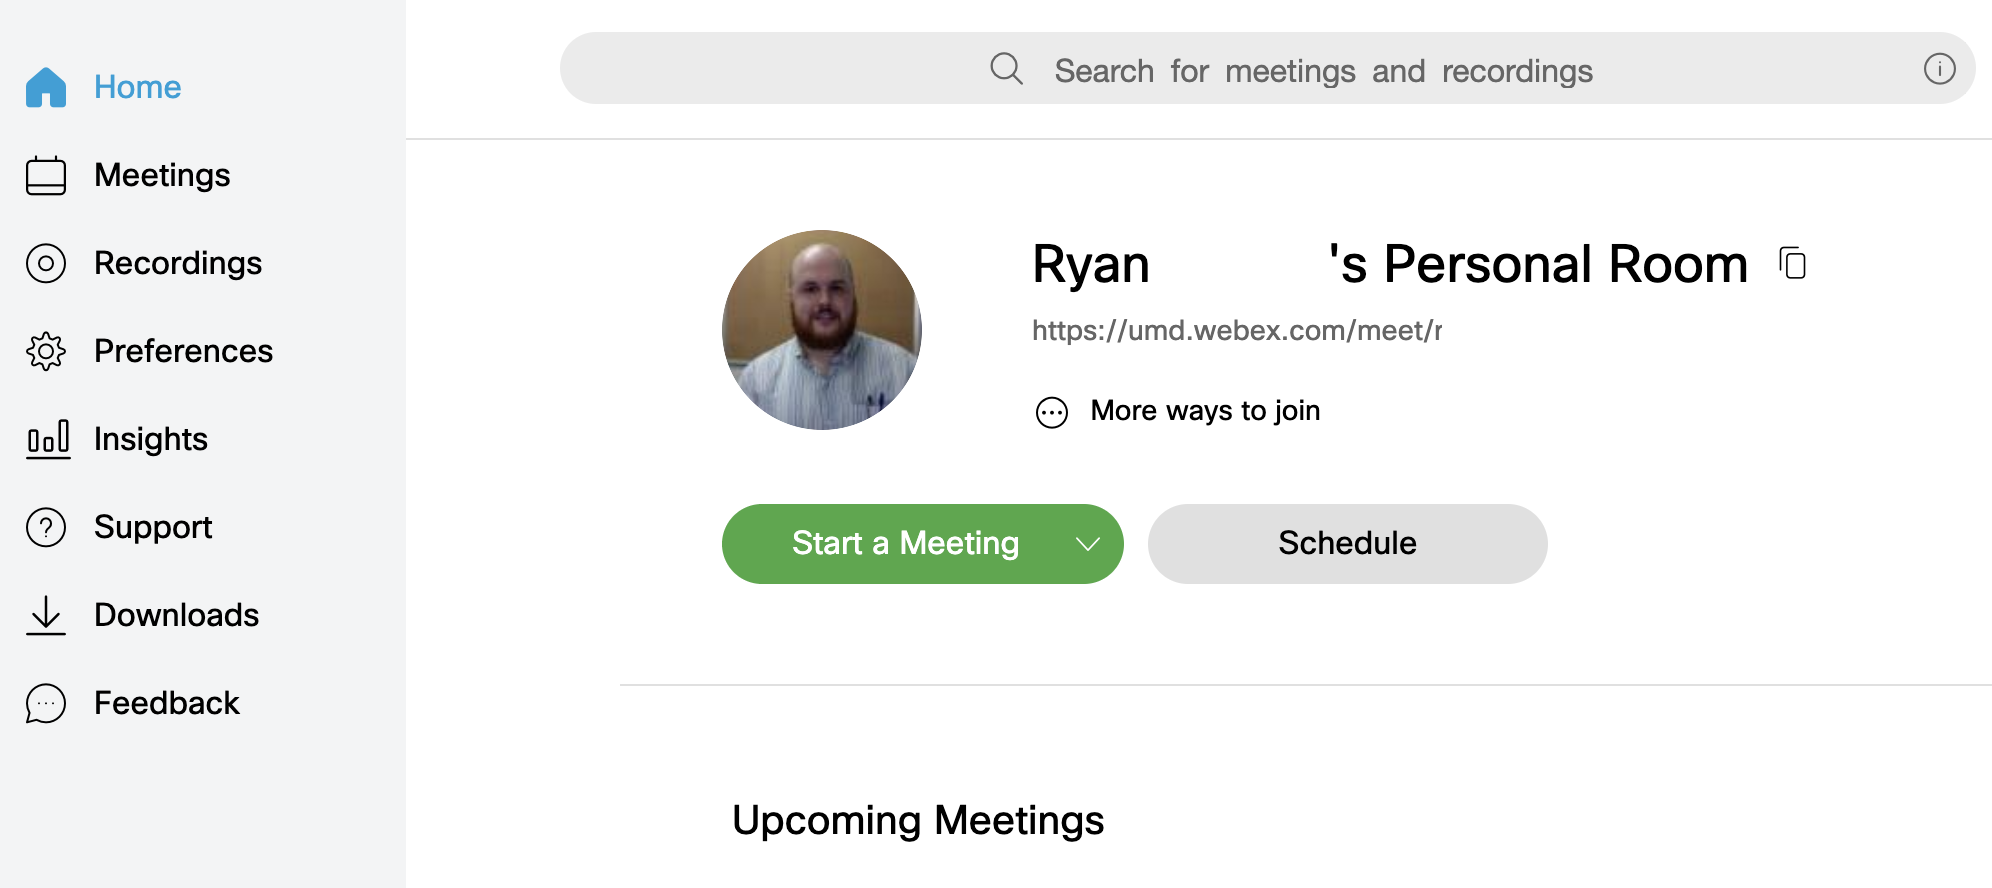 home page for Webex Modern View profile